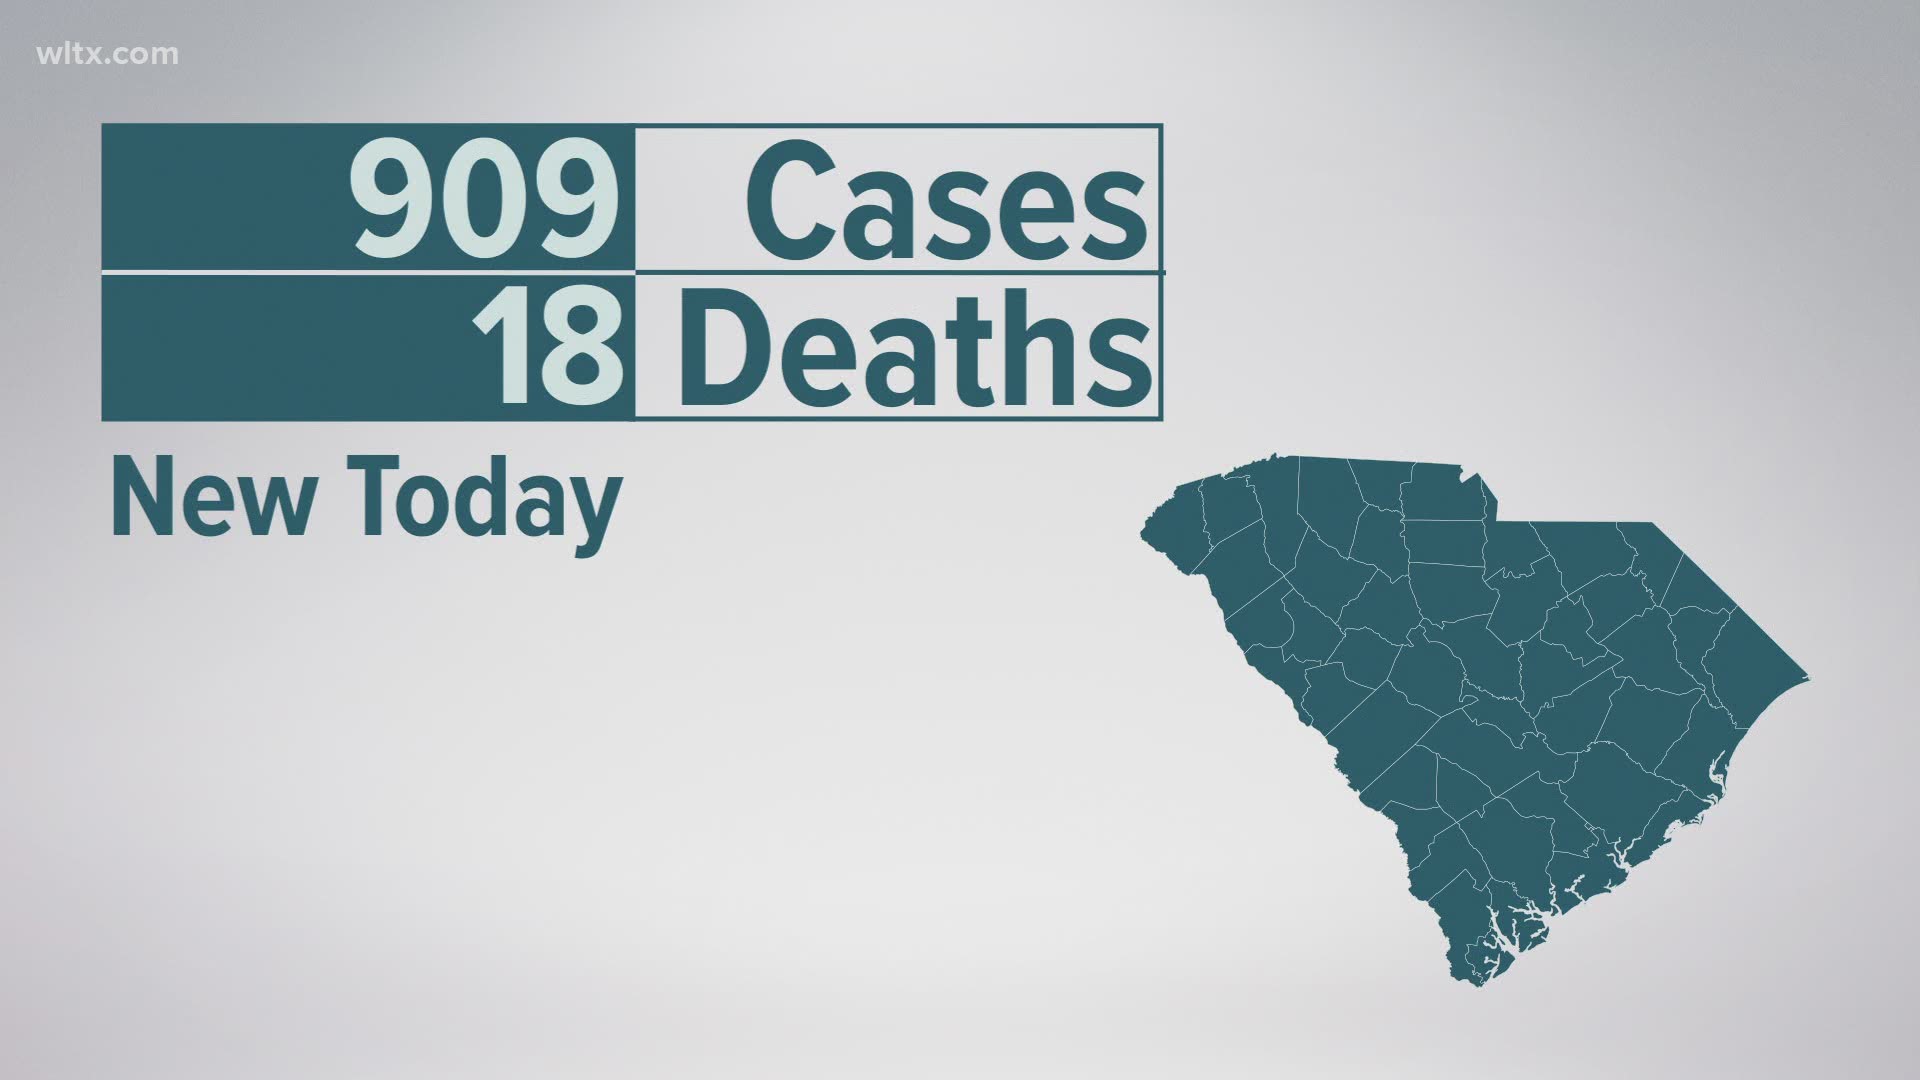 That's 387 more than the previous day. However, the streak of not exceeding 1,000 cases in a day now has reached 10.